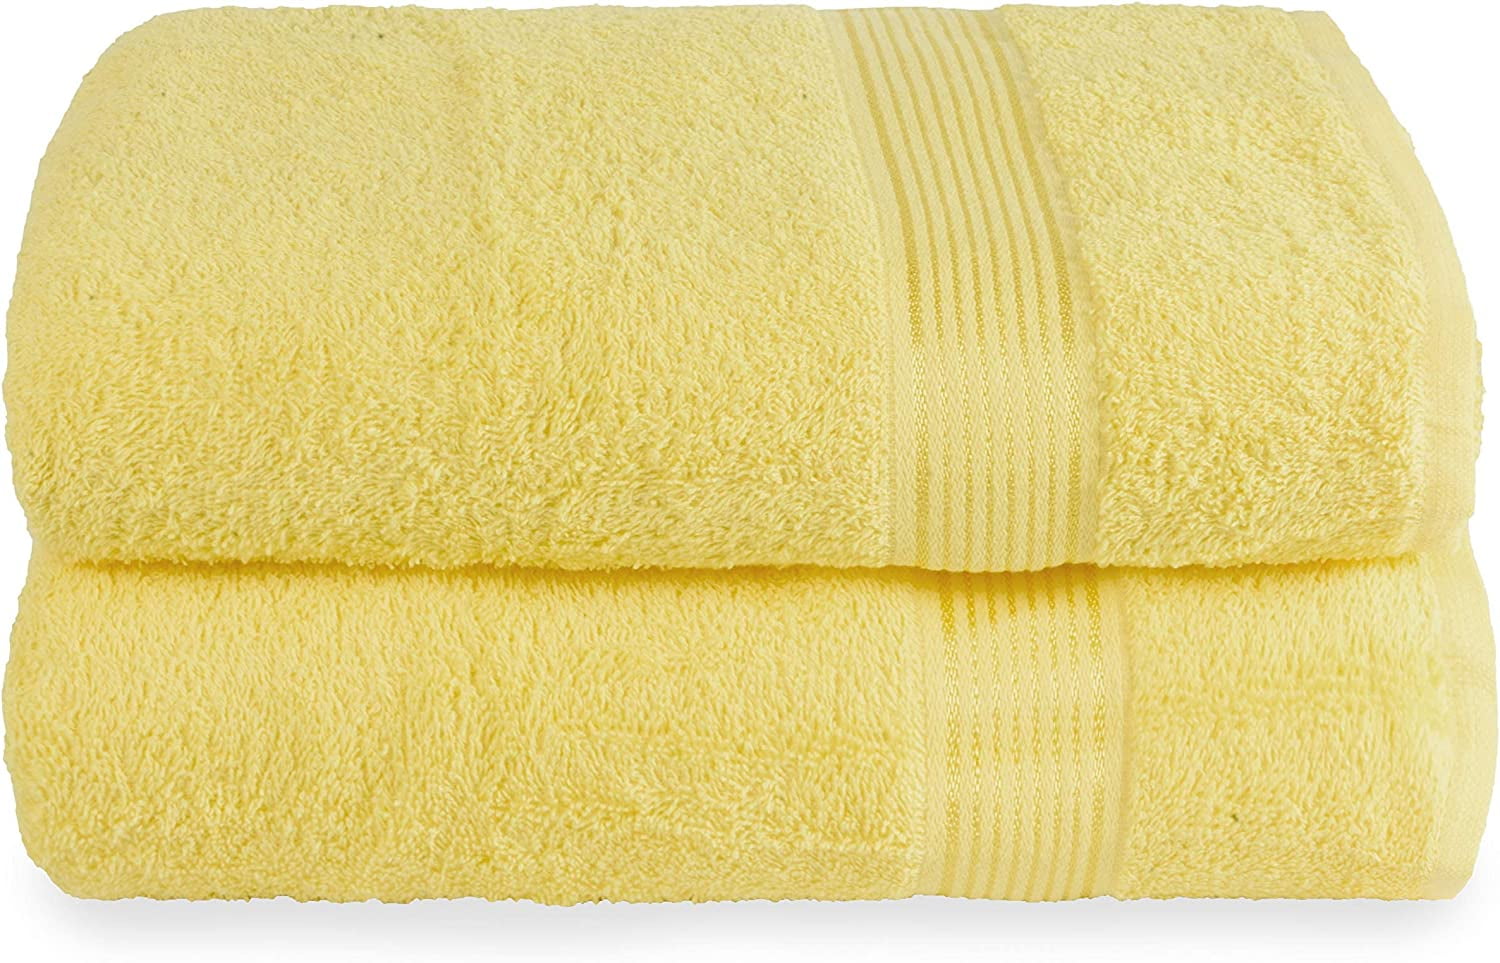  BELIZZI HOME 2 Pack Oversized Cotton Bath Towels, Tan, 28x55  inches : Home & Kitchen